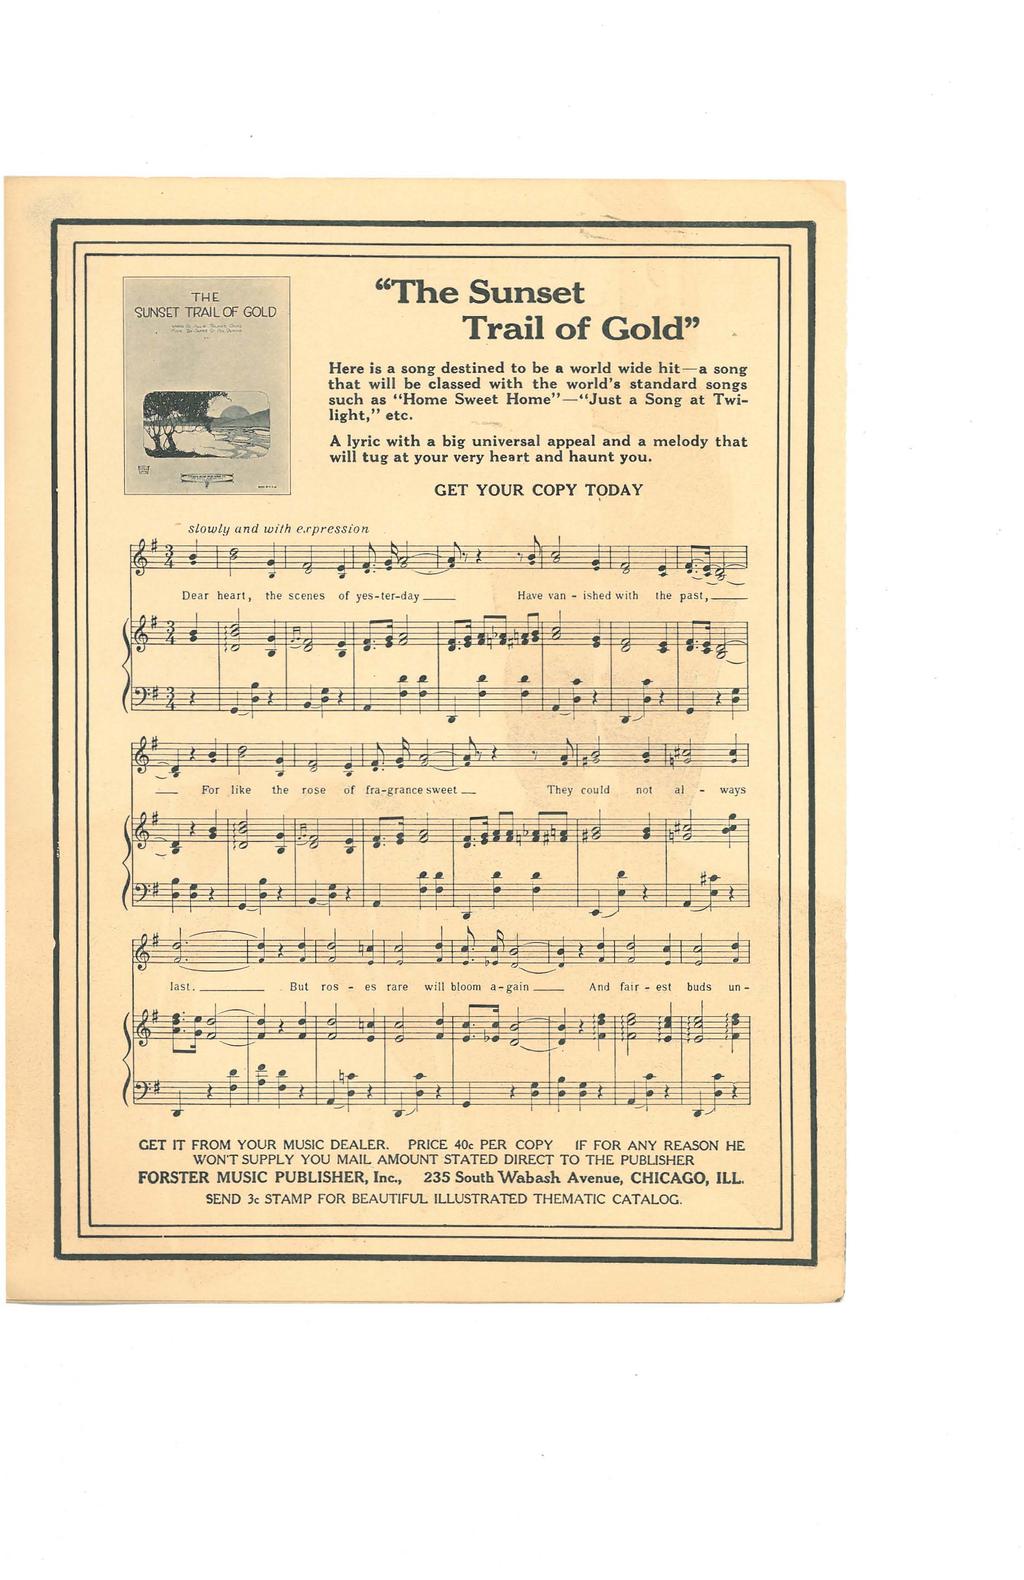 TH UN[T TRAL OF GOLD _ :: :: "The Sunset Tail of Gold" Hee is a song destined to be a wold wide hita song that will be classed with the wold's standad songs such as "Home Sweet Home""Just a Song at